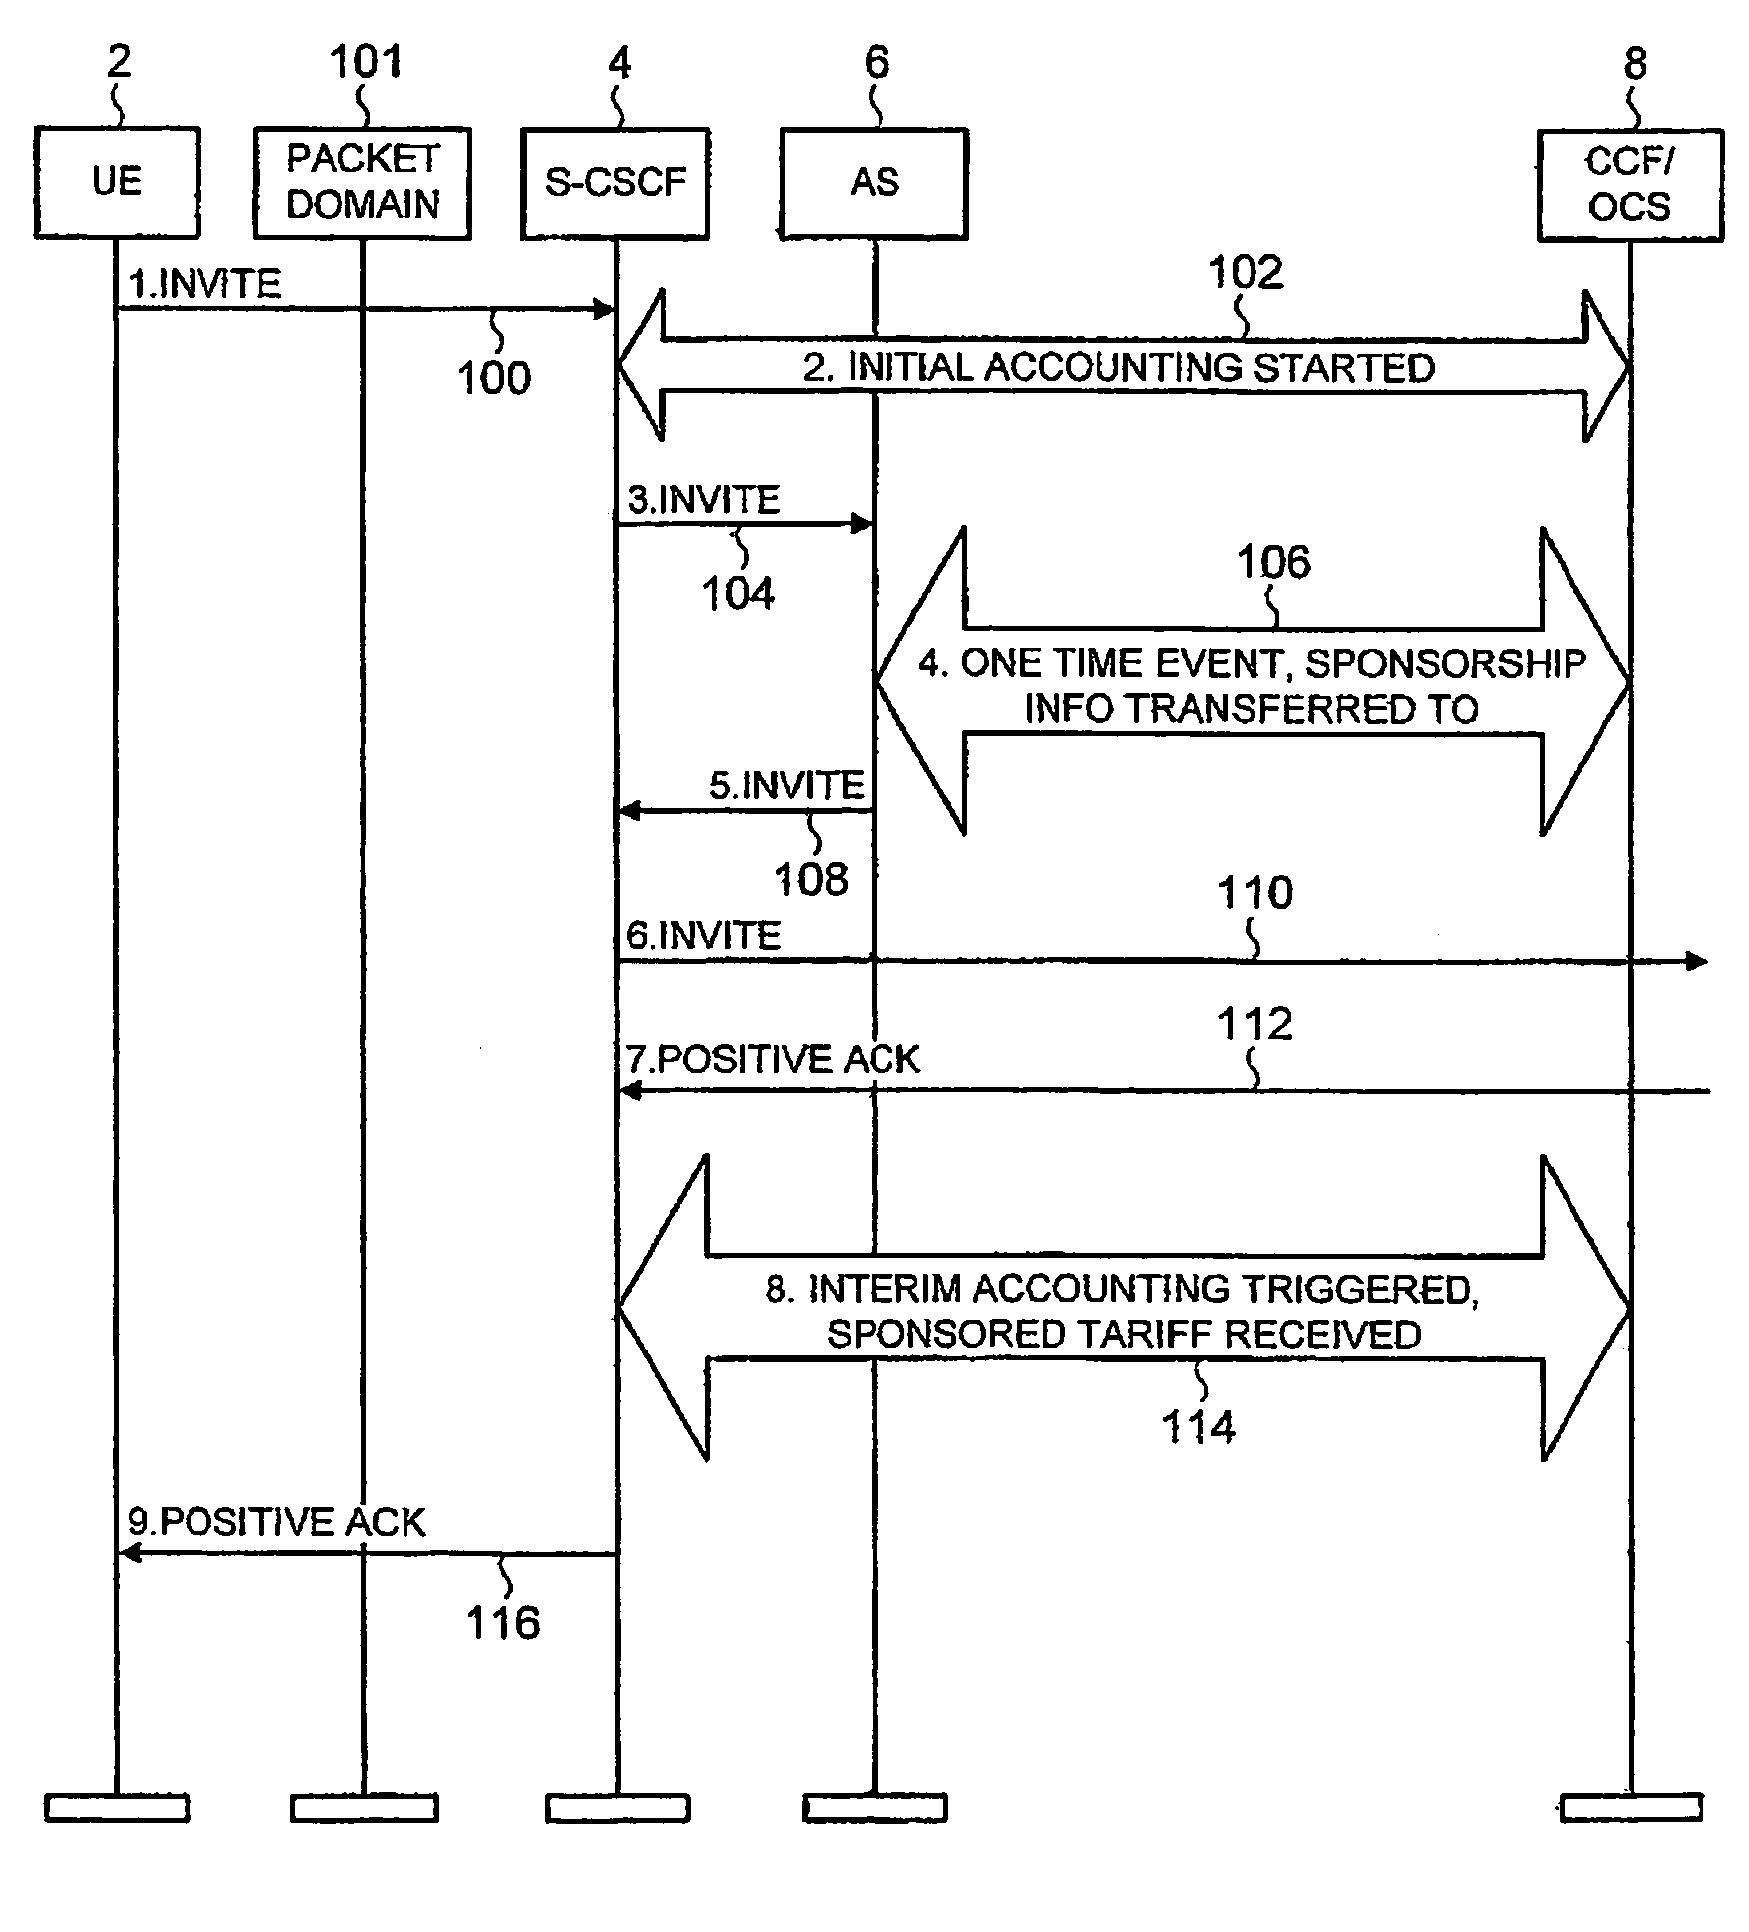 Charging for an IP based communication system